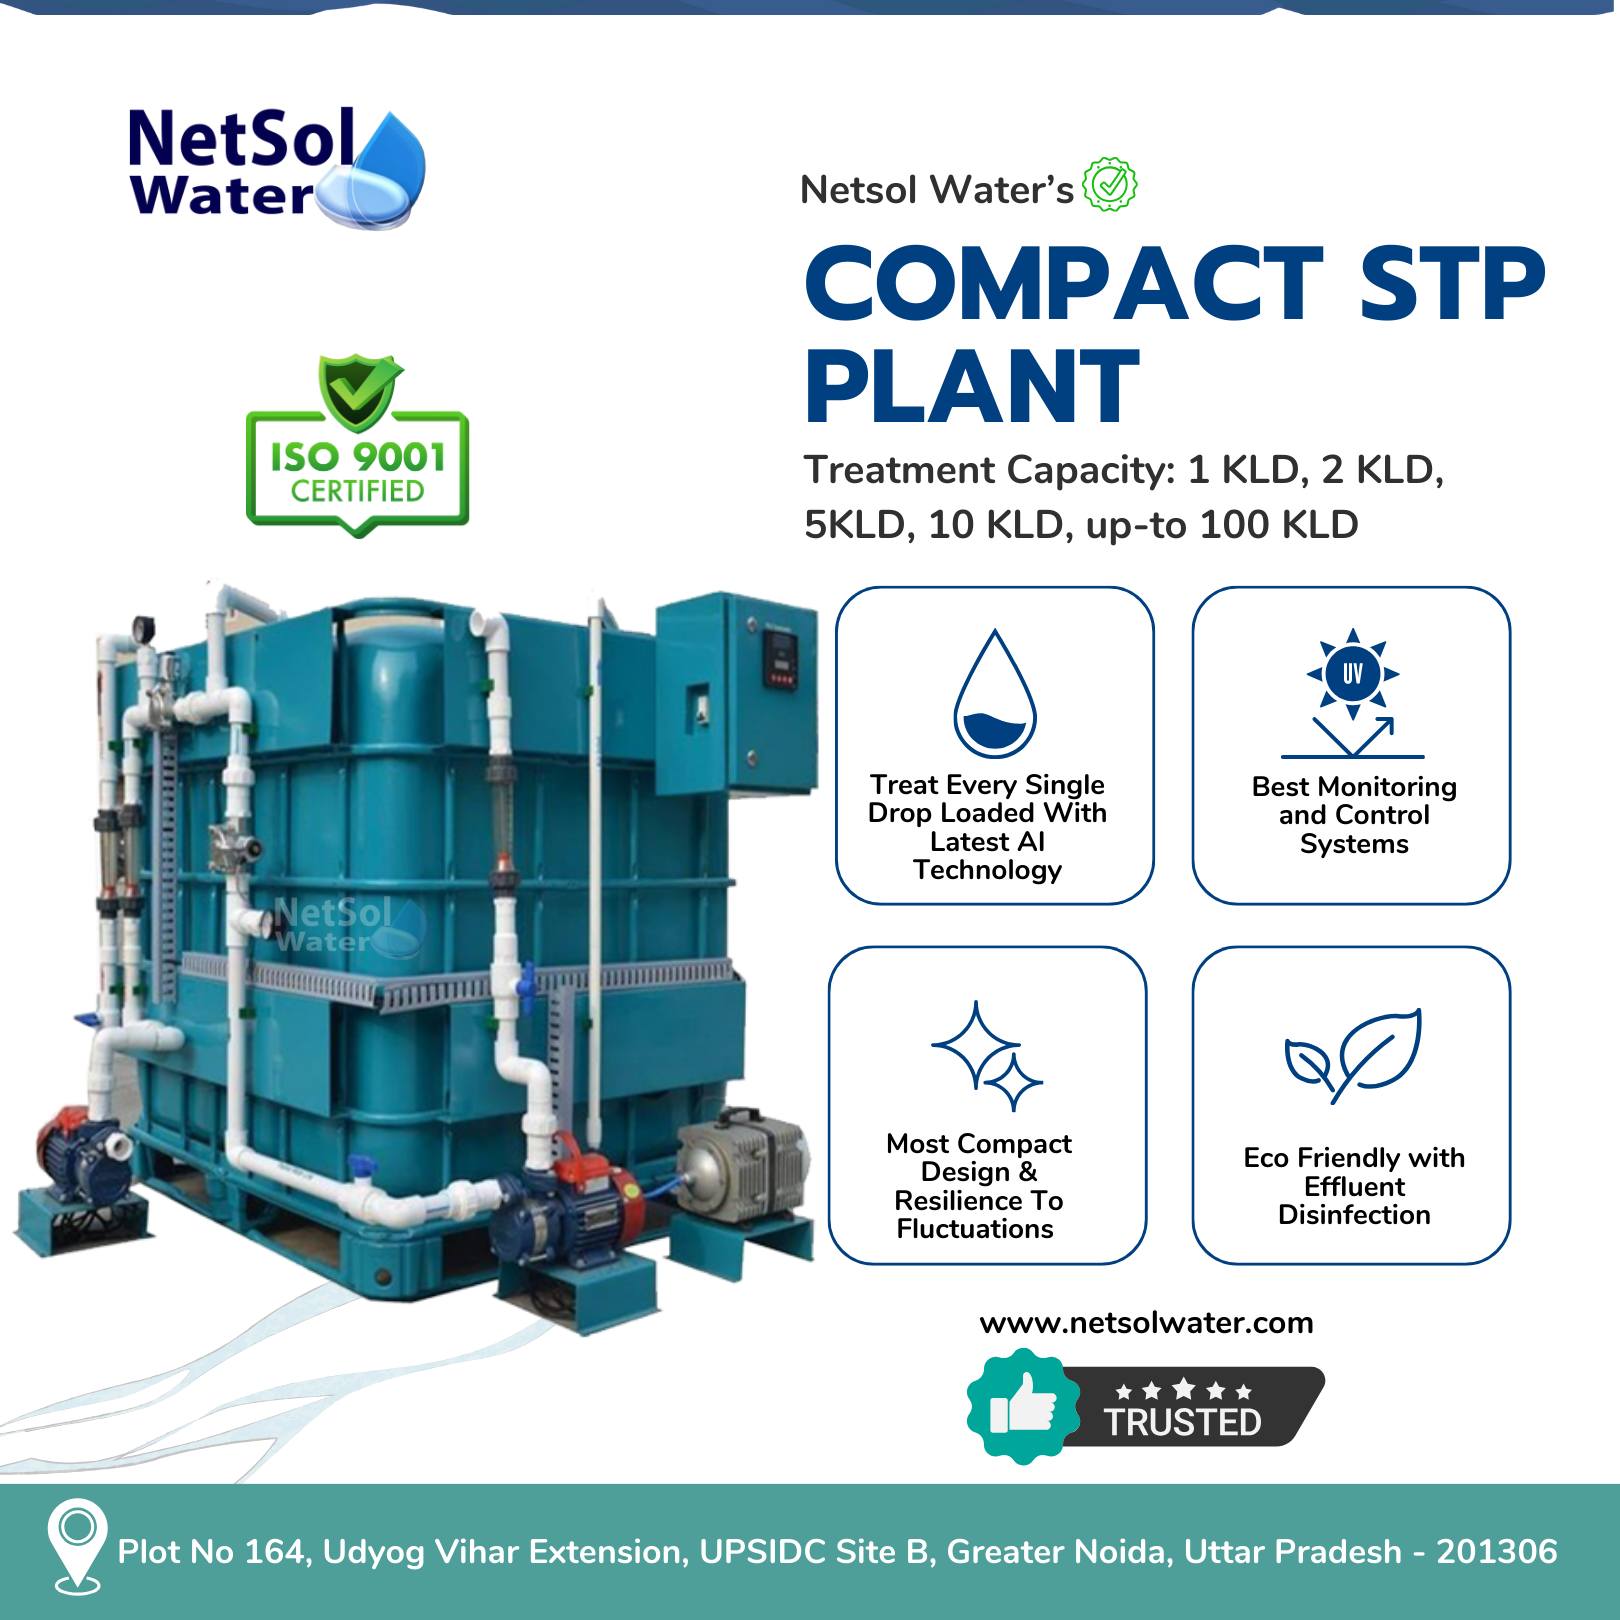 NetSo

Water Netsol Water's ©

COMPACT STP
v. PLANT

| oo | Treatment Capacity: 1 KLD, 2 KLD,
5KLD, 10 KLD, up-to 100 KLD

Treat Every Single Best Monitoring
Drop Loaded With and Control

Latest Al Systems
Technology

Most C ct . .
Design & Eco Friendly with

o Effluent
Resilience To wt :
Fluctuations Disinfection

  

www.netsolwater.com

Oxy

Q Plot No 164, Udyog Vihar Extension, UPSIDC Site B, Greater Noida, Uttar Pradesh - 201306
(5)